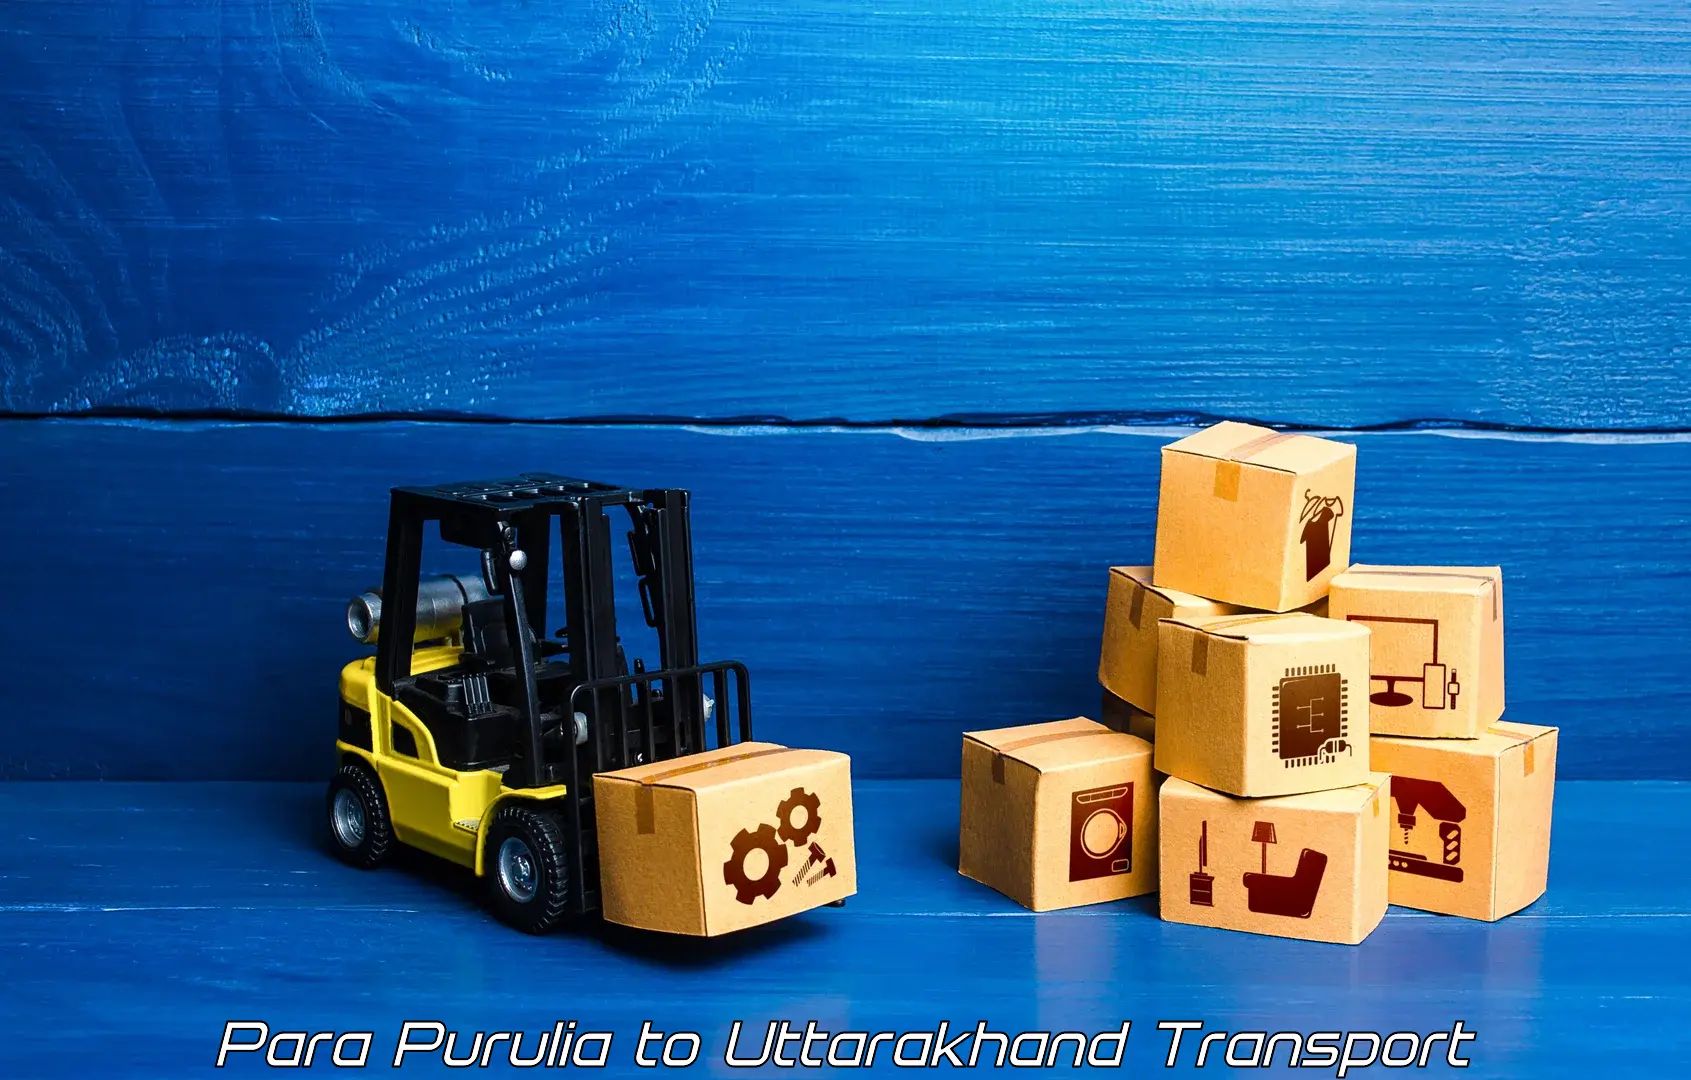 Logistics transportation services in Para Purulia to Lohaghat